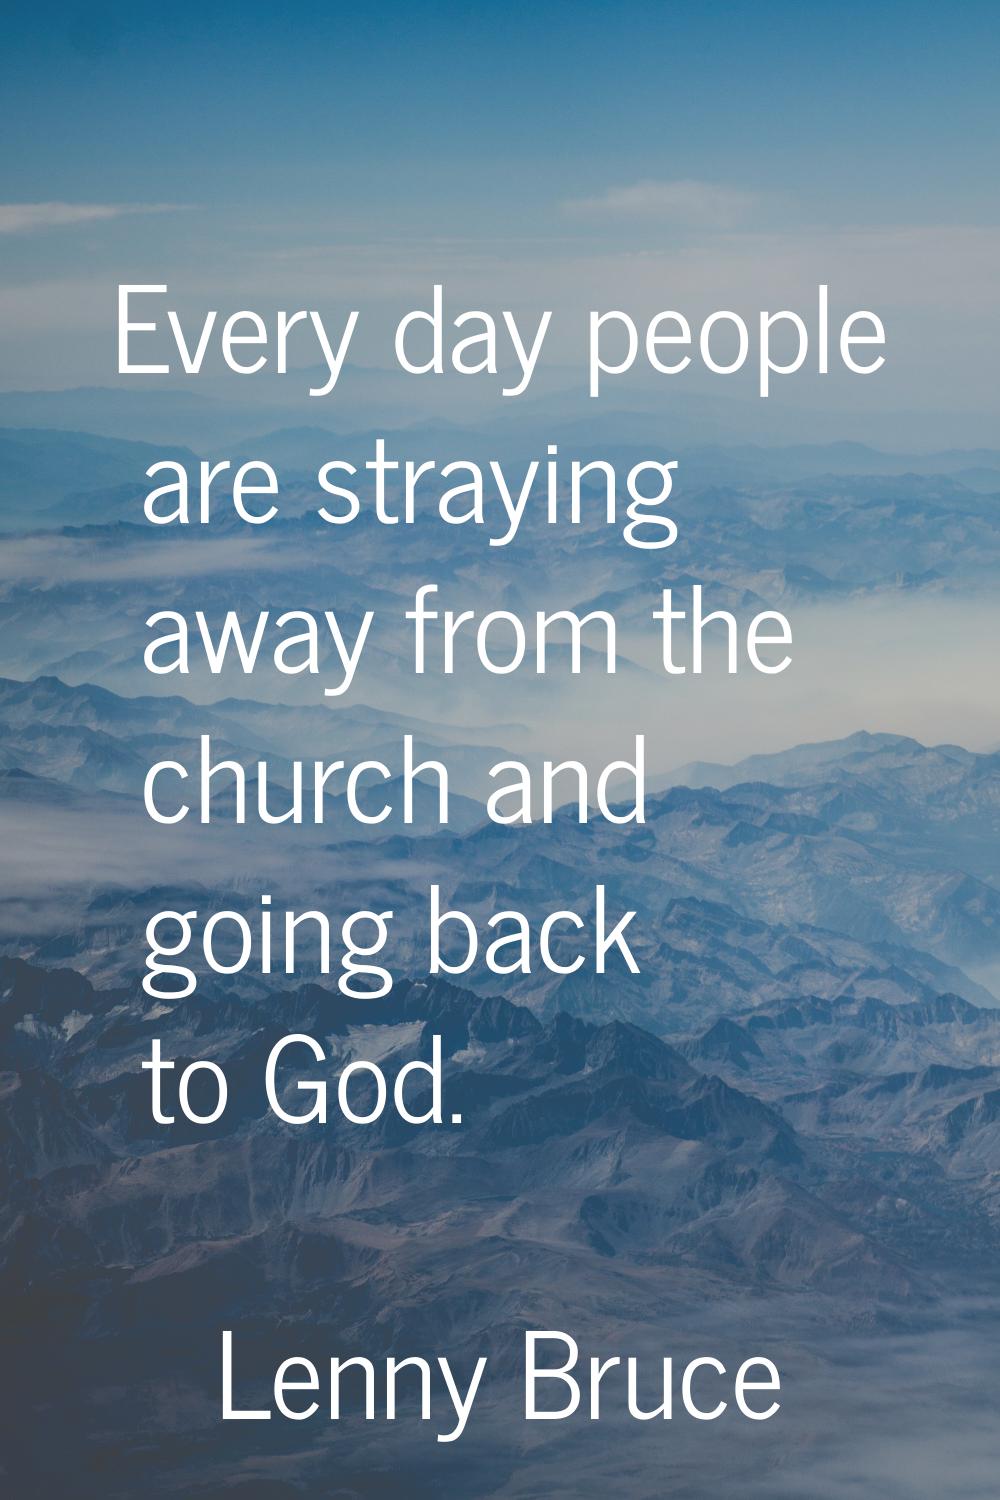 Every day people are straying away from the church and going back to God.